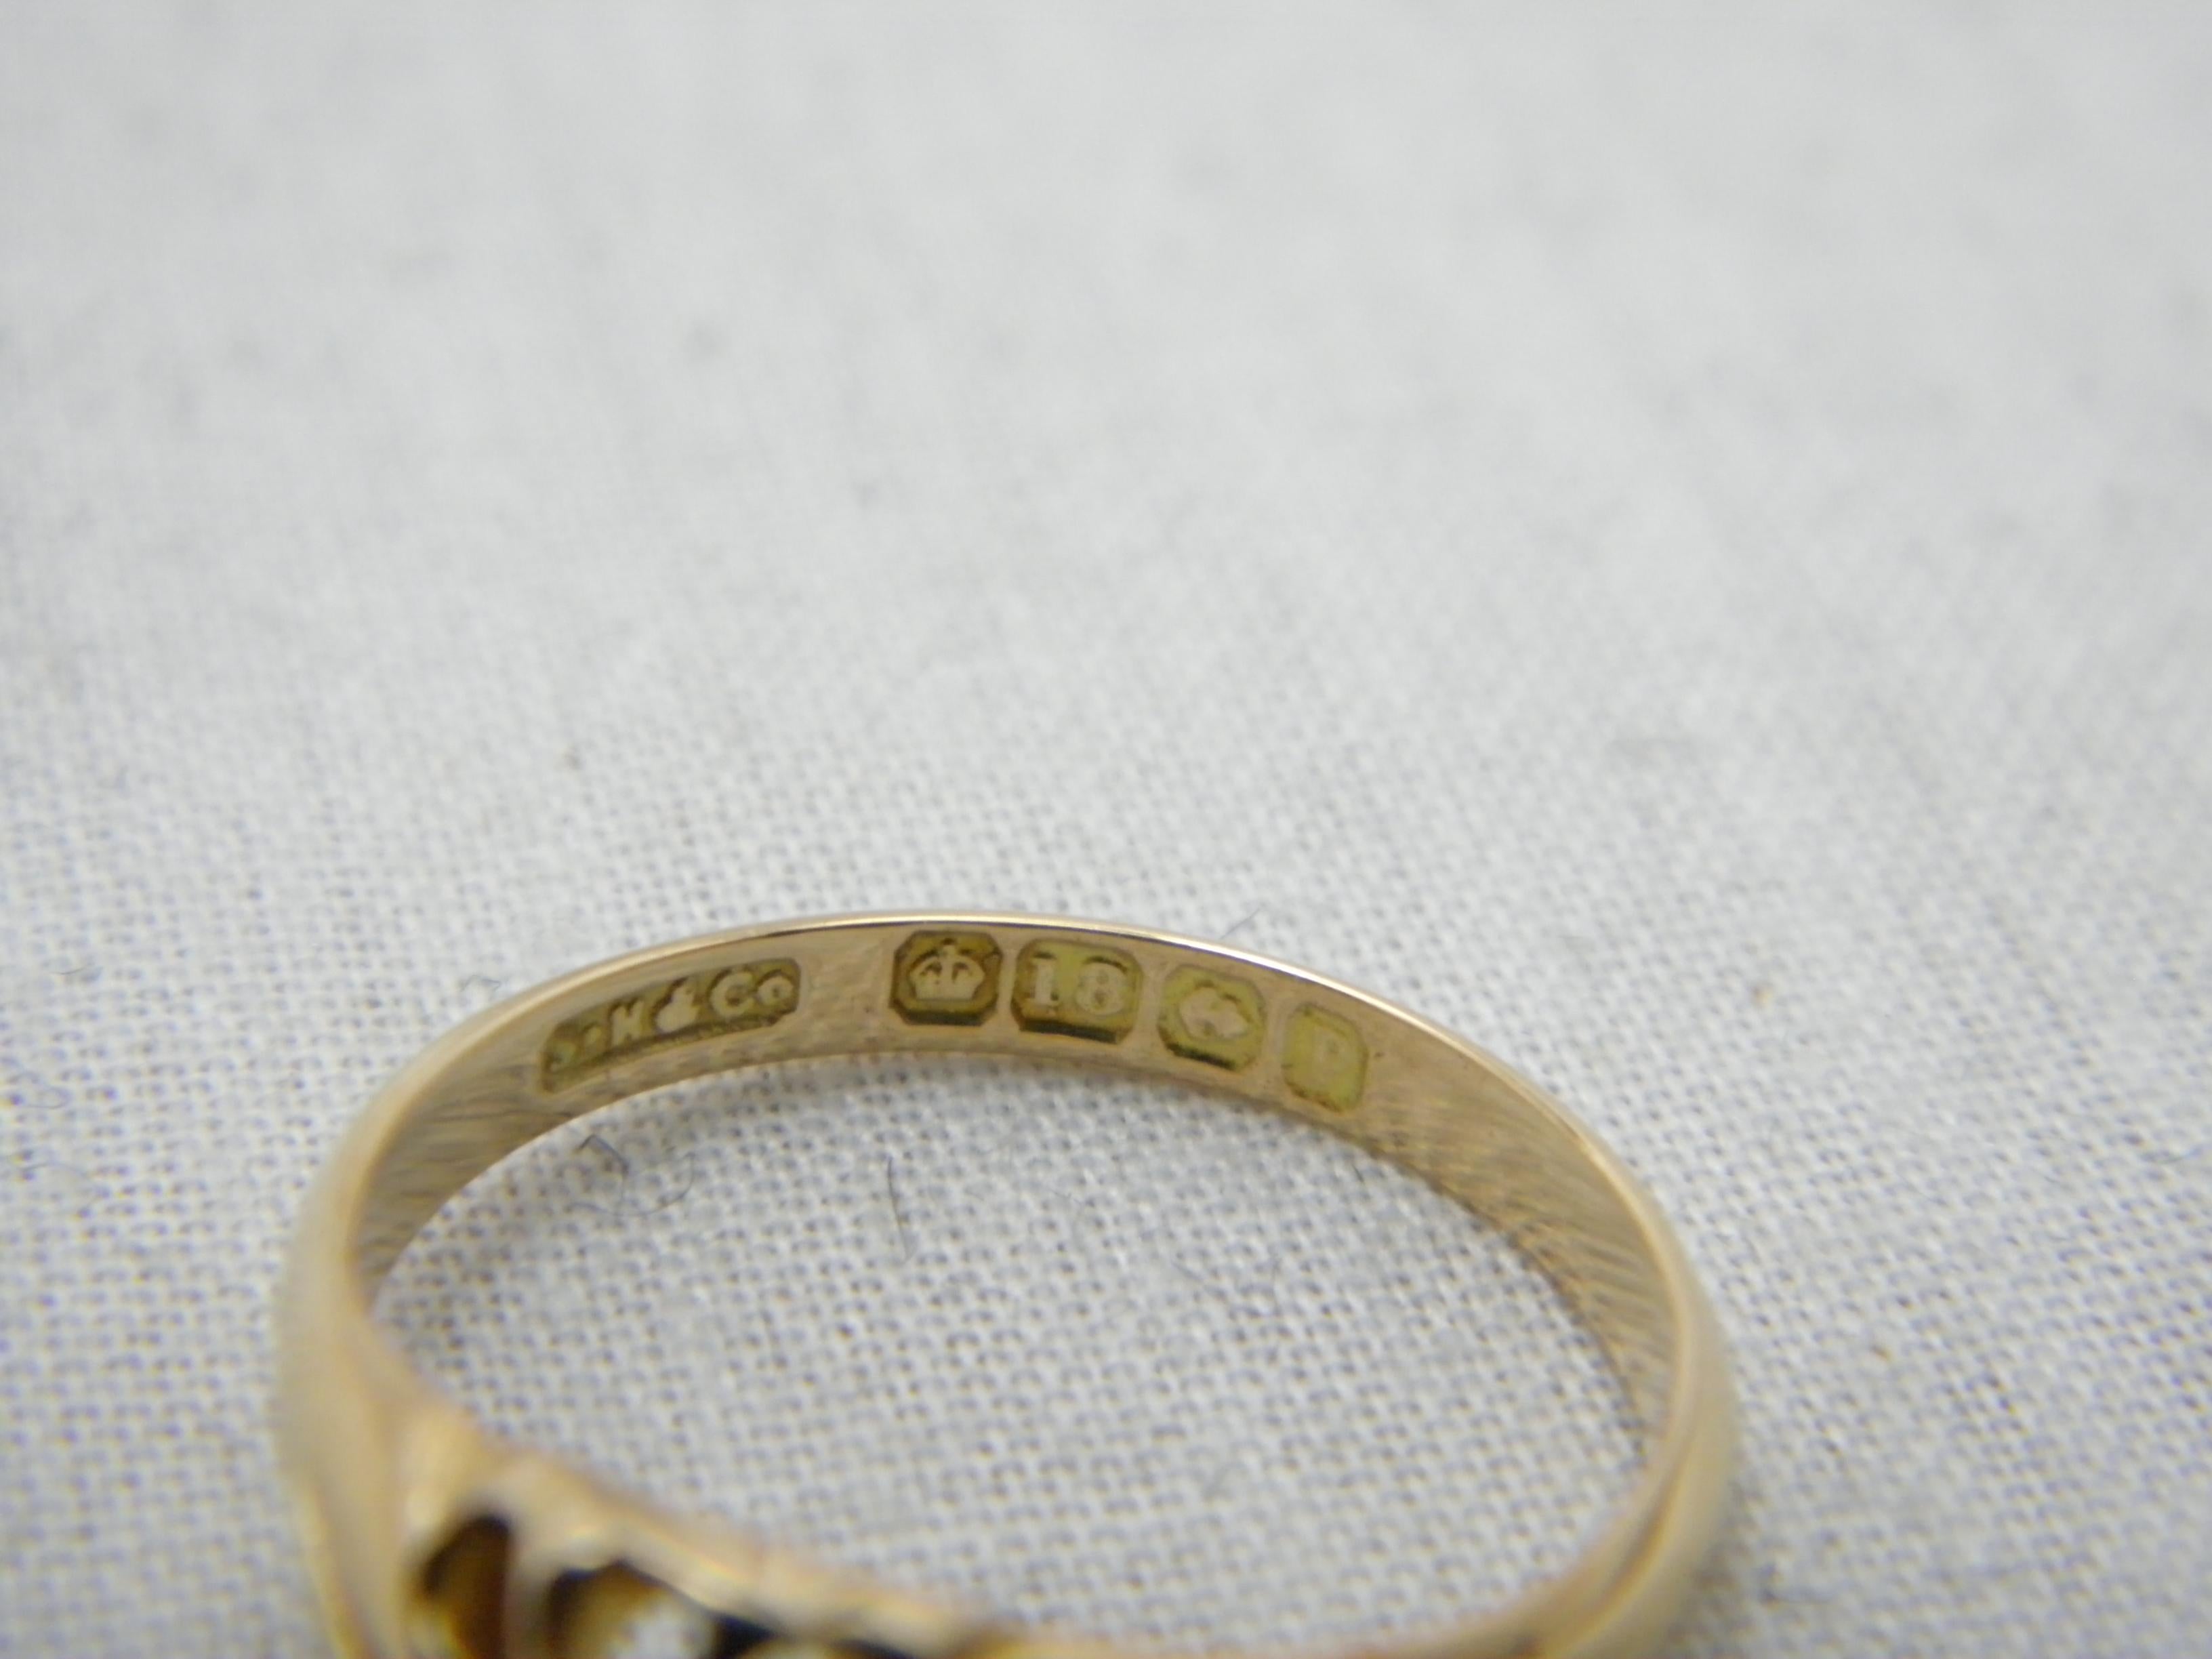 Antique 18ct Gold 0.33Cttw Diamond Solitaire Gypsy Ring Size N 6.75 750 Purity In Good Condition For Sale In Camelford, GB